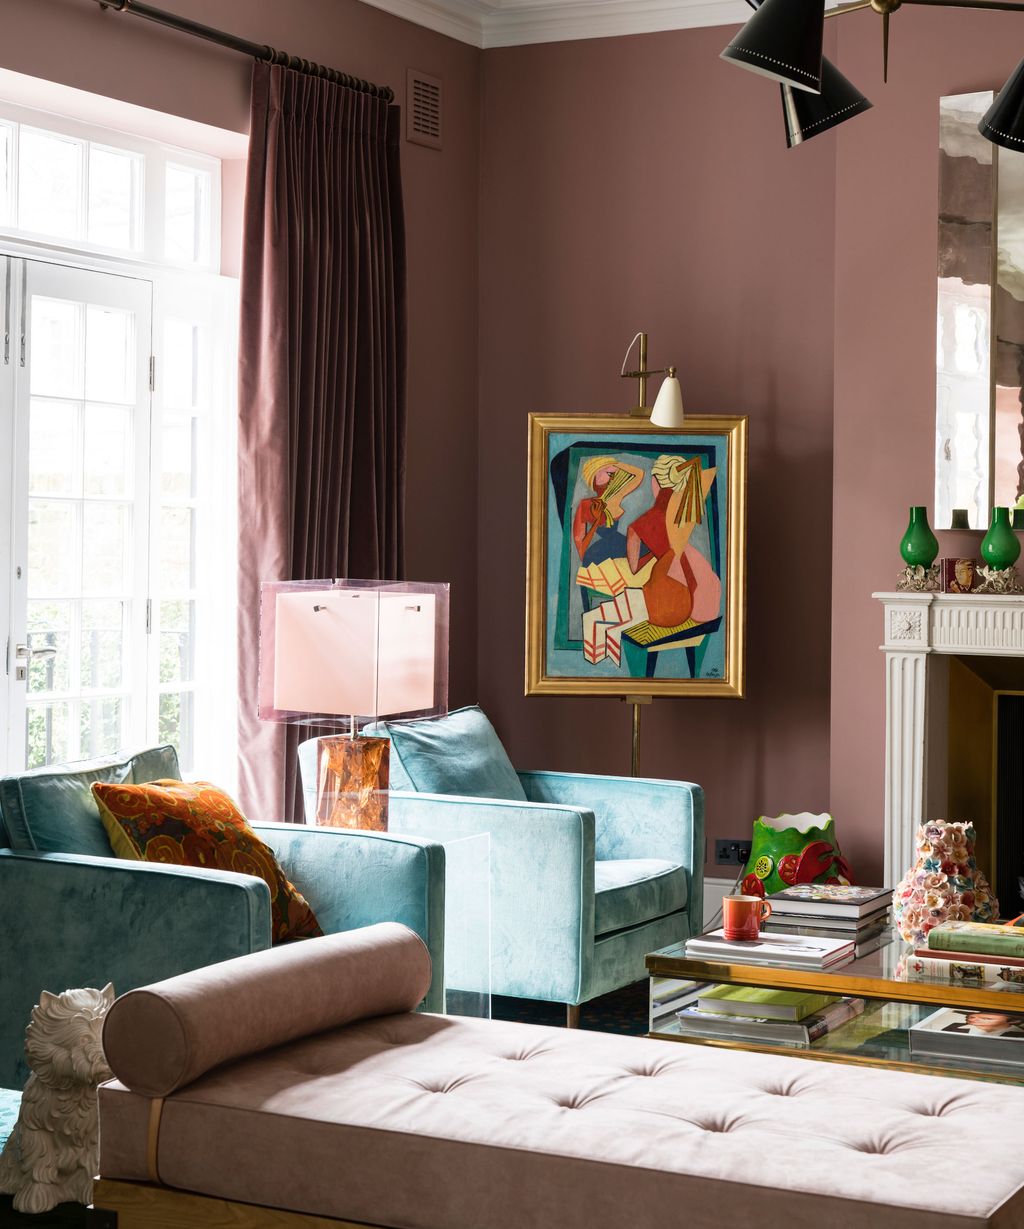 Pink living room ideas: 10 blush and terracotta decor tips